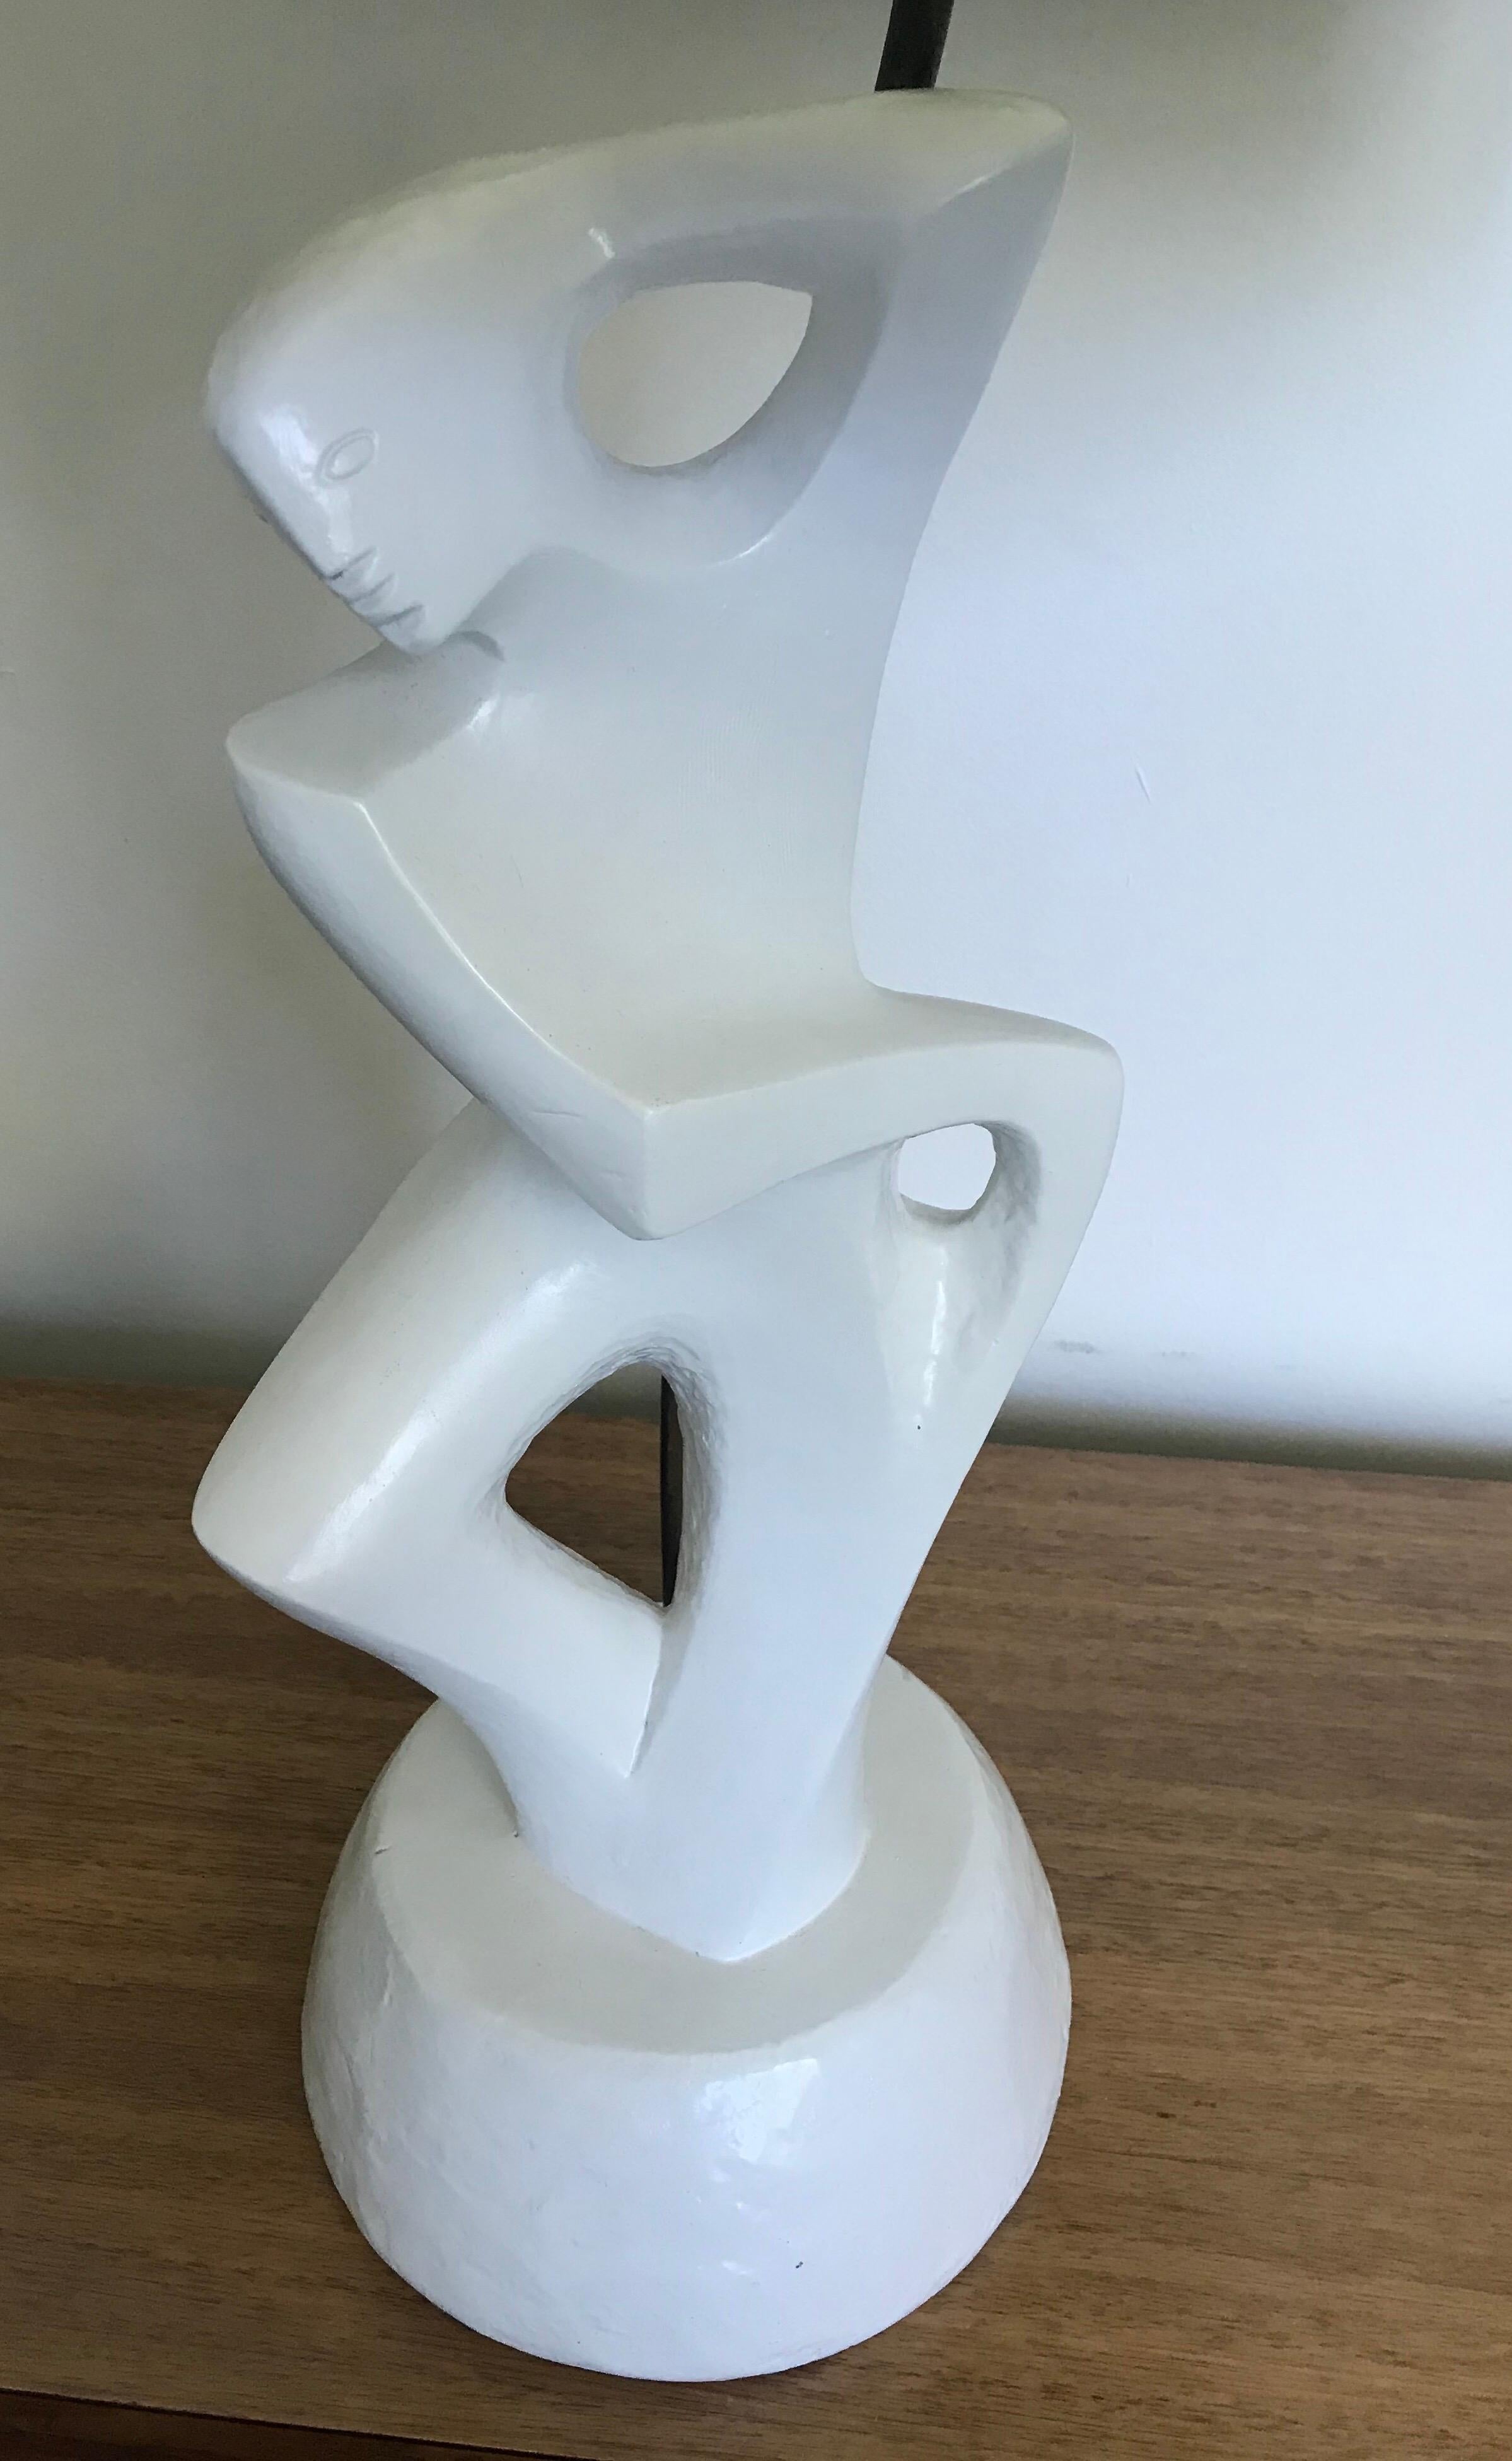 Rare cubism figurative male lamp by Marianna von Allesch circa 1950s, signed. Rewired, shade not included.
Marianna von Allesch was a German-born artist who moved the United States in the late 1920s and was known for her sculptures and particularly